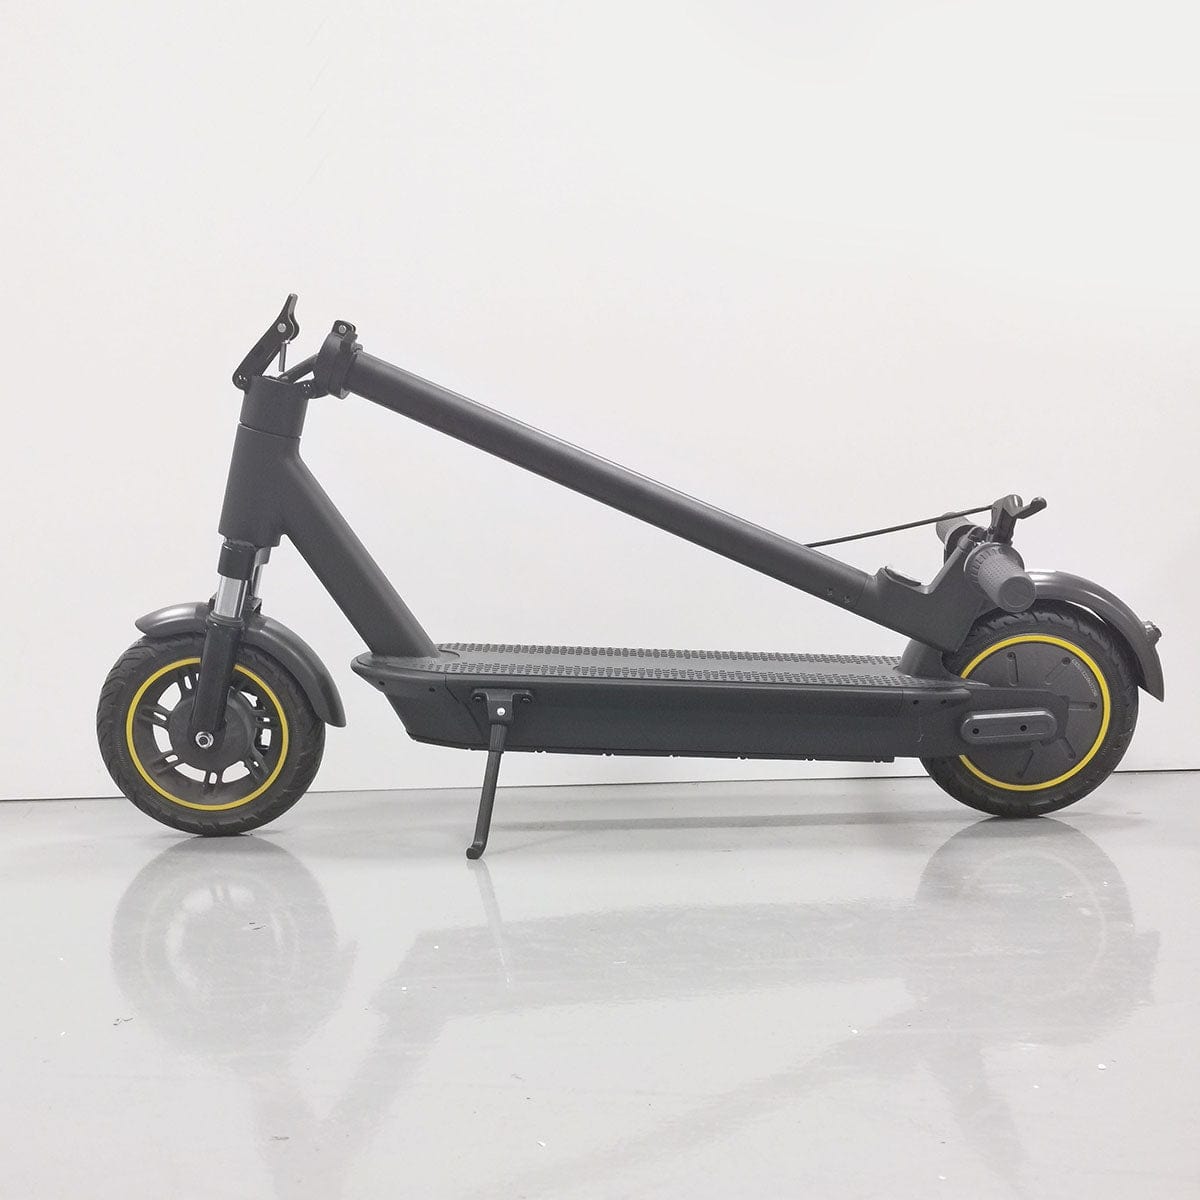 EZ-T4 Max iEZWAY  Electric Scooter with 500W Motor,36V15Ah Battery, Max Speed 21 mph and 10" Tires